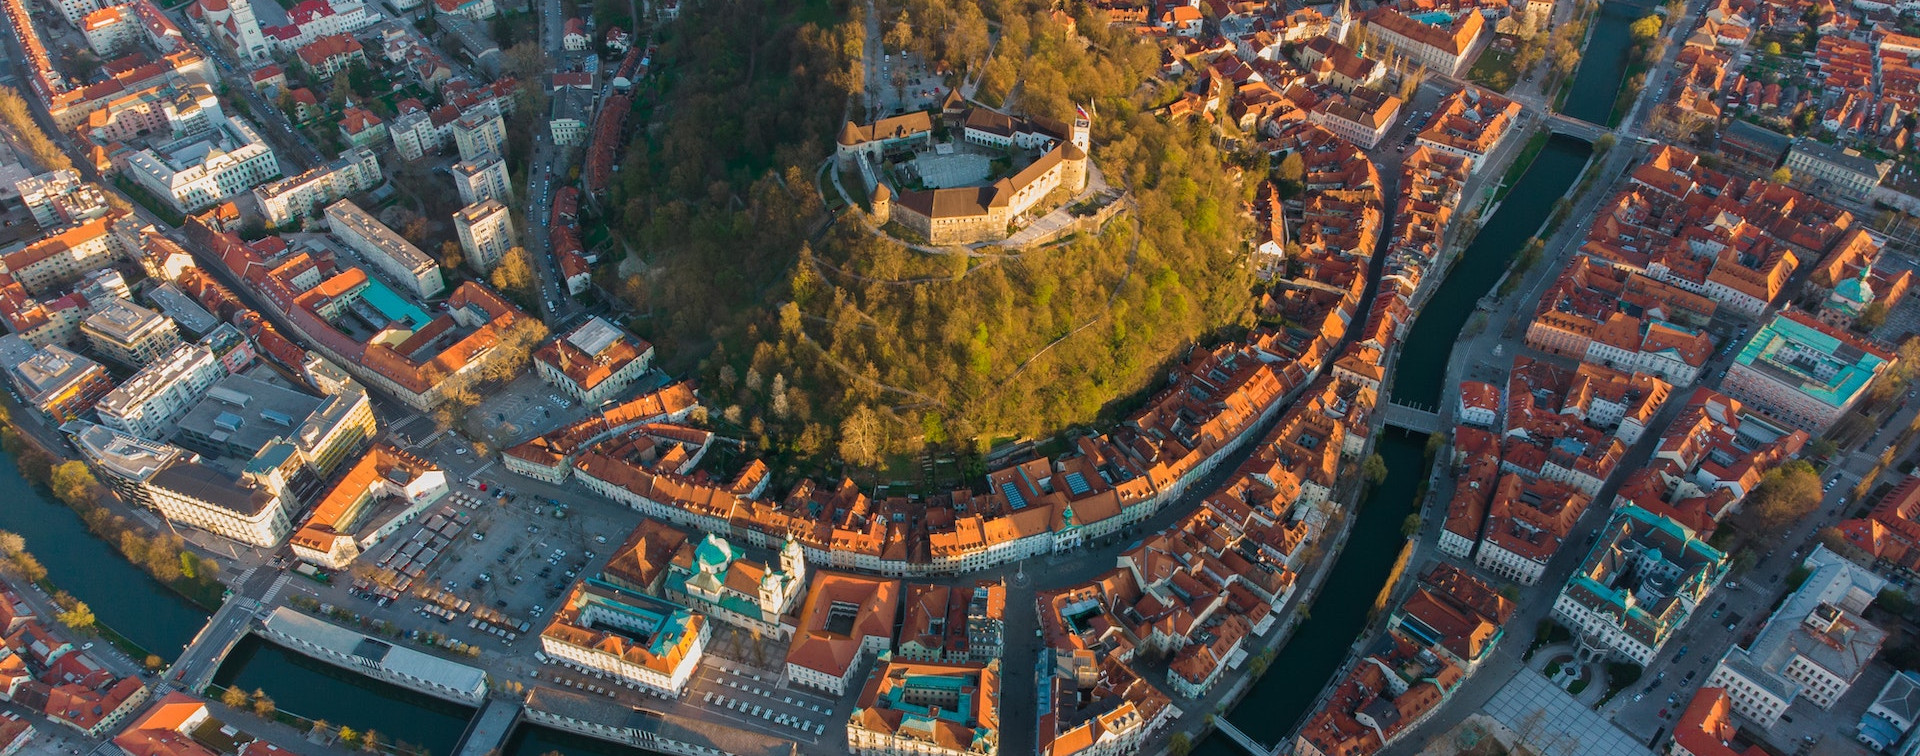 DLM Forum Members' Meeting in Ljubljana, 10-11 May 2023 - Call for papers open